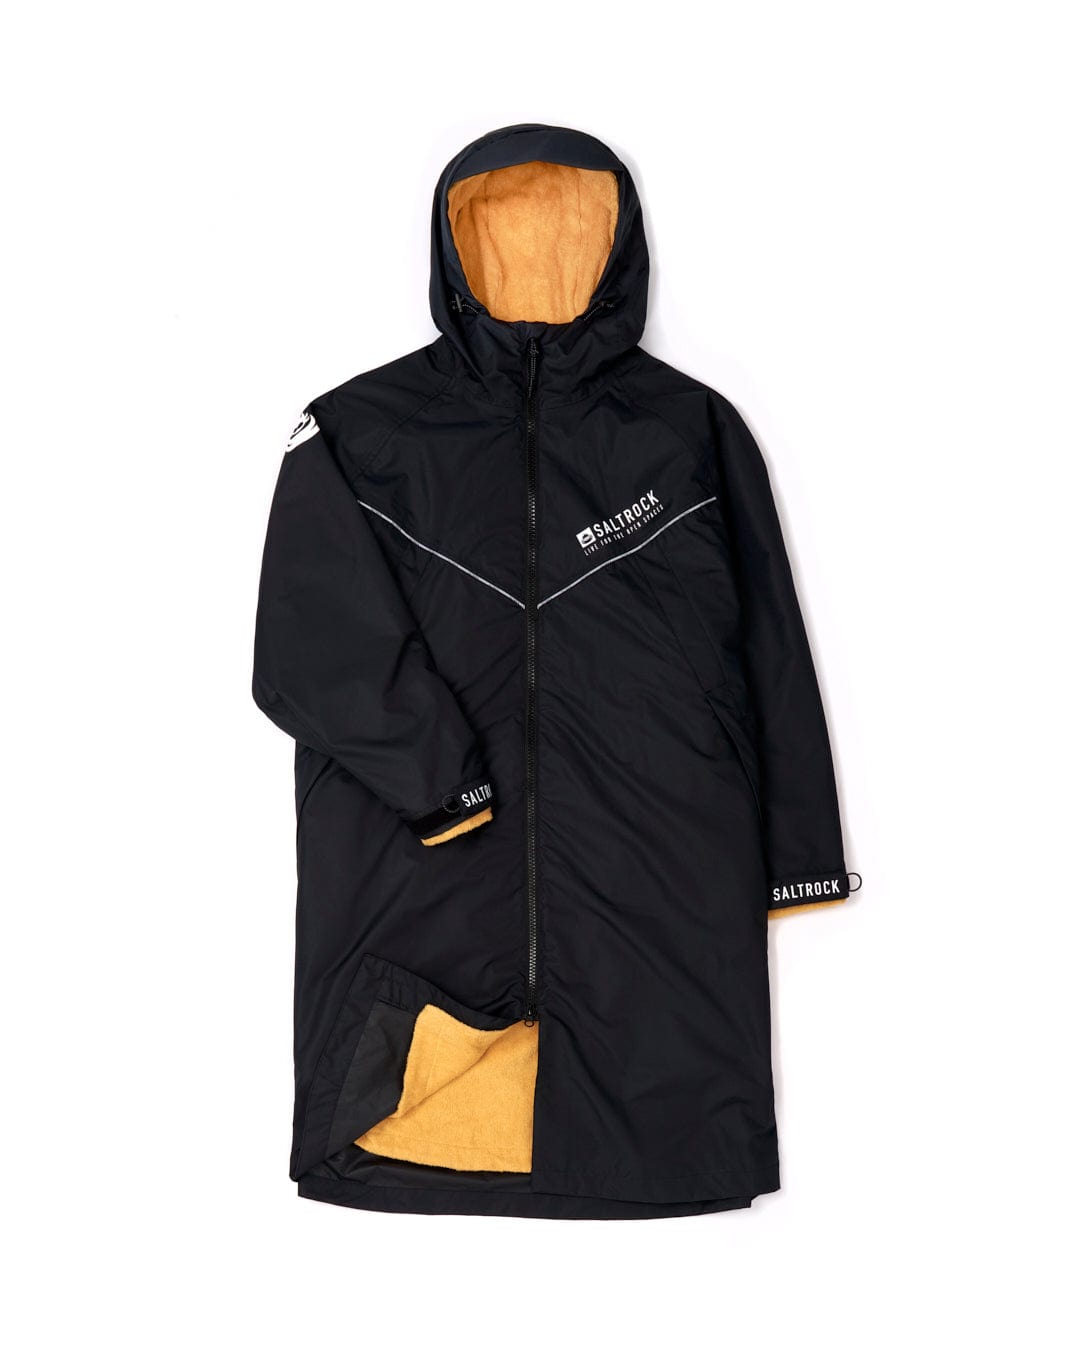 Saltrock black waterproof jacket with a hood and yellow towelling lining, displayed flat against a white background. Brand logos on the chest and sleeve.